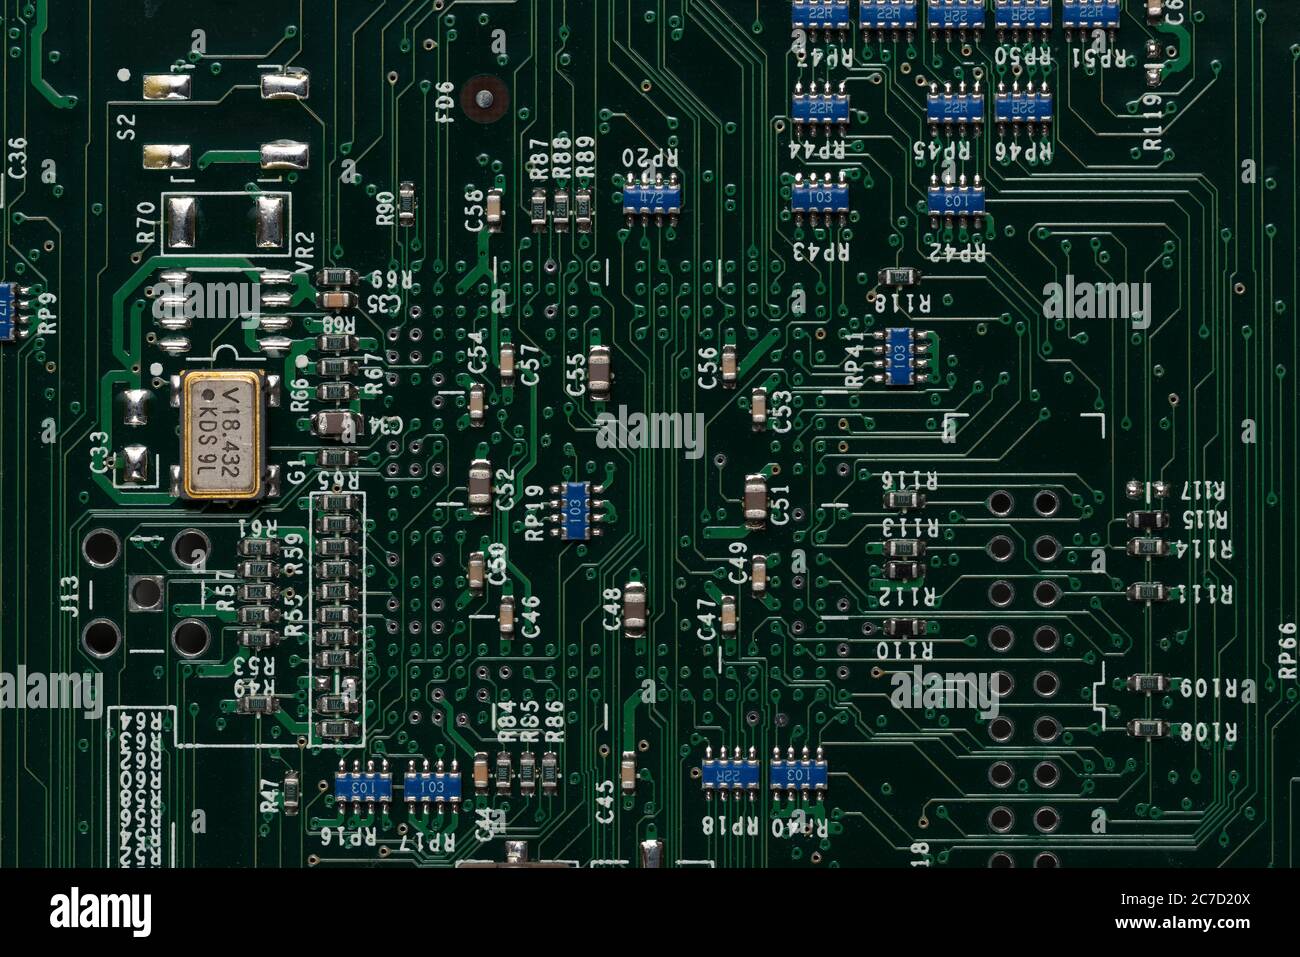 Neat printed circuit board from Mac computer with chip, diode, coil, resistors, capacitors like street layout in city arranged in rows and lines Stock Photo